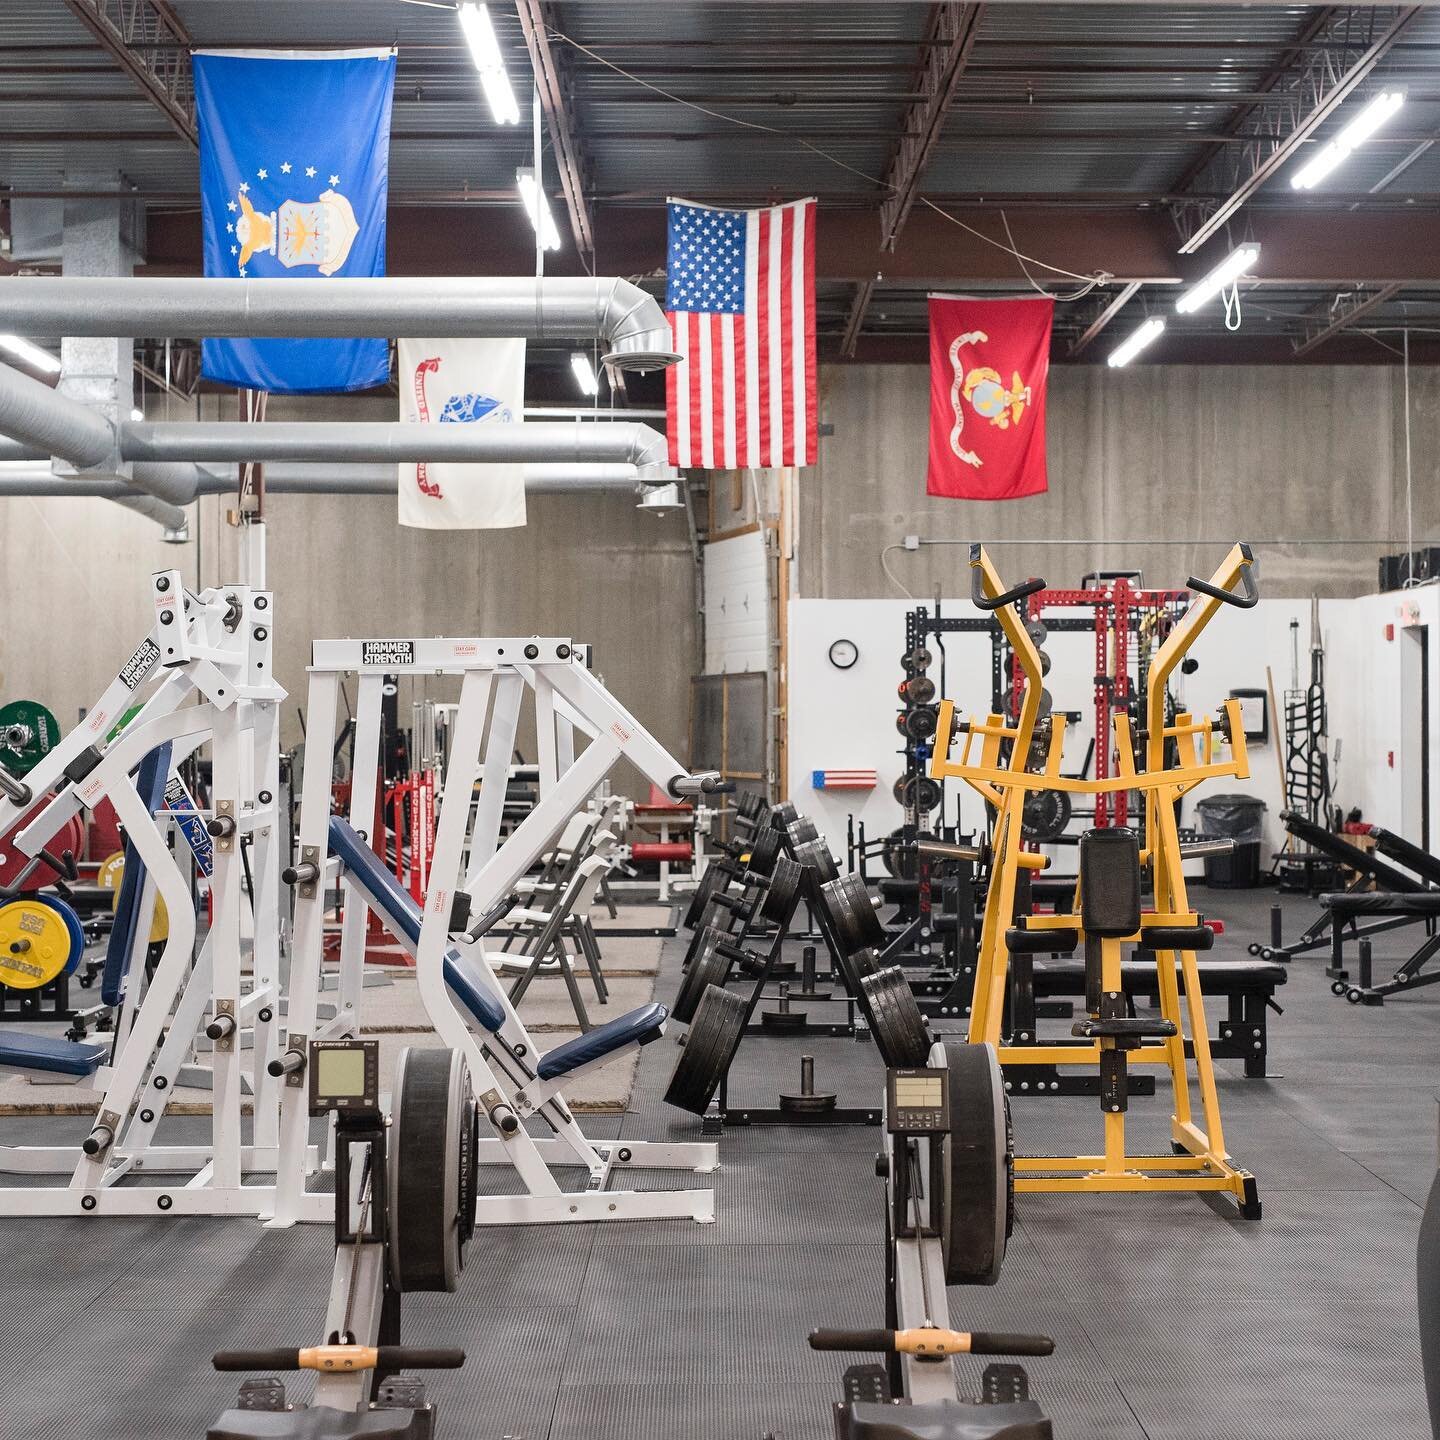 Memorial Day 🇺🇸⁣
⁣
Remember and Honor those who made the ultimate sacrifice for their country. ⁣
⁣
Today and everyday, we honor you. #memorialday #americanstrength #americanstrengthtrainingcenter